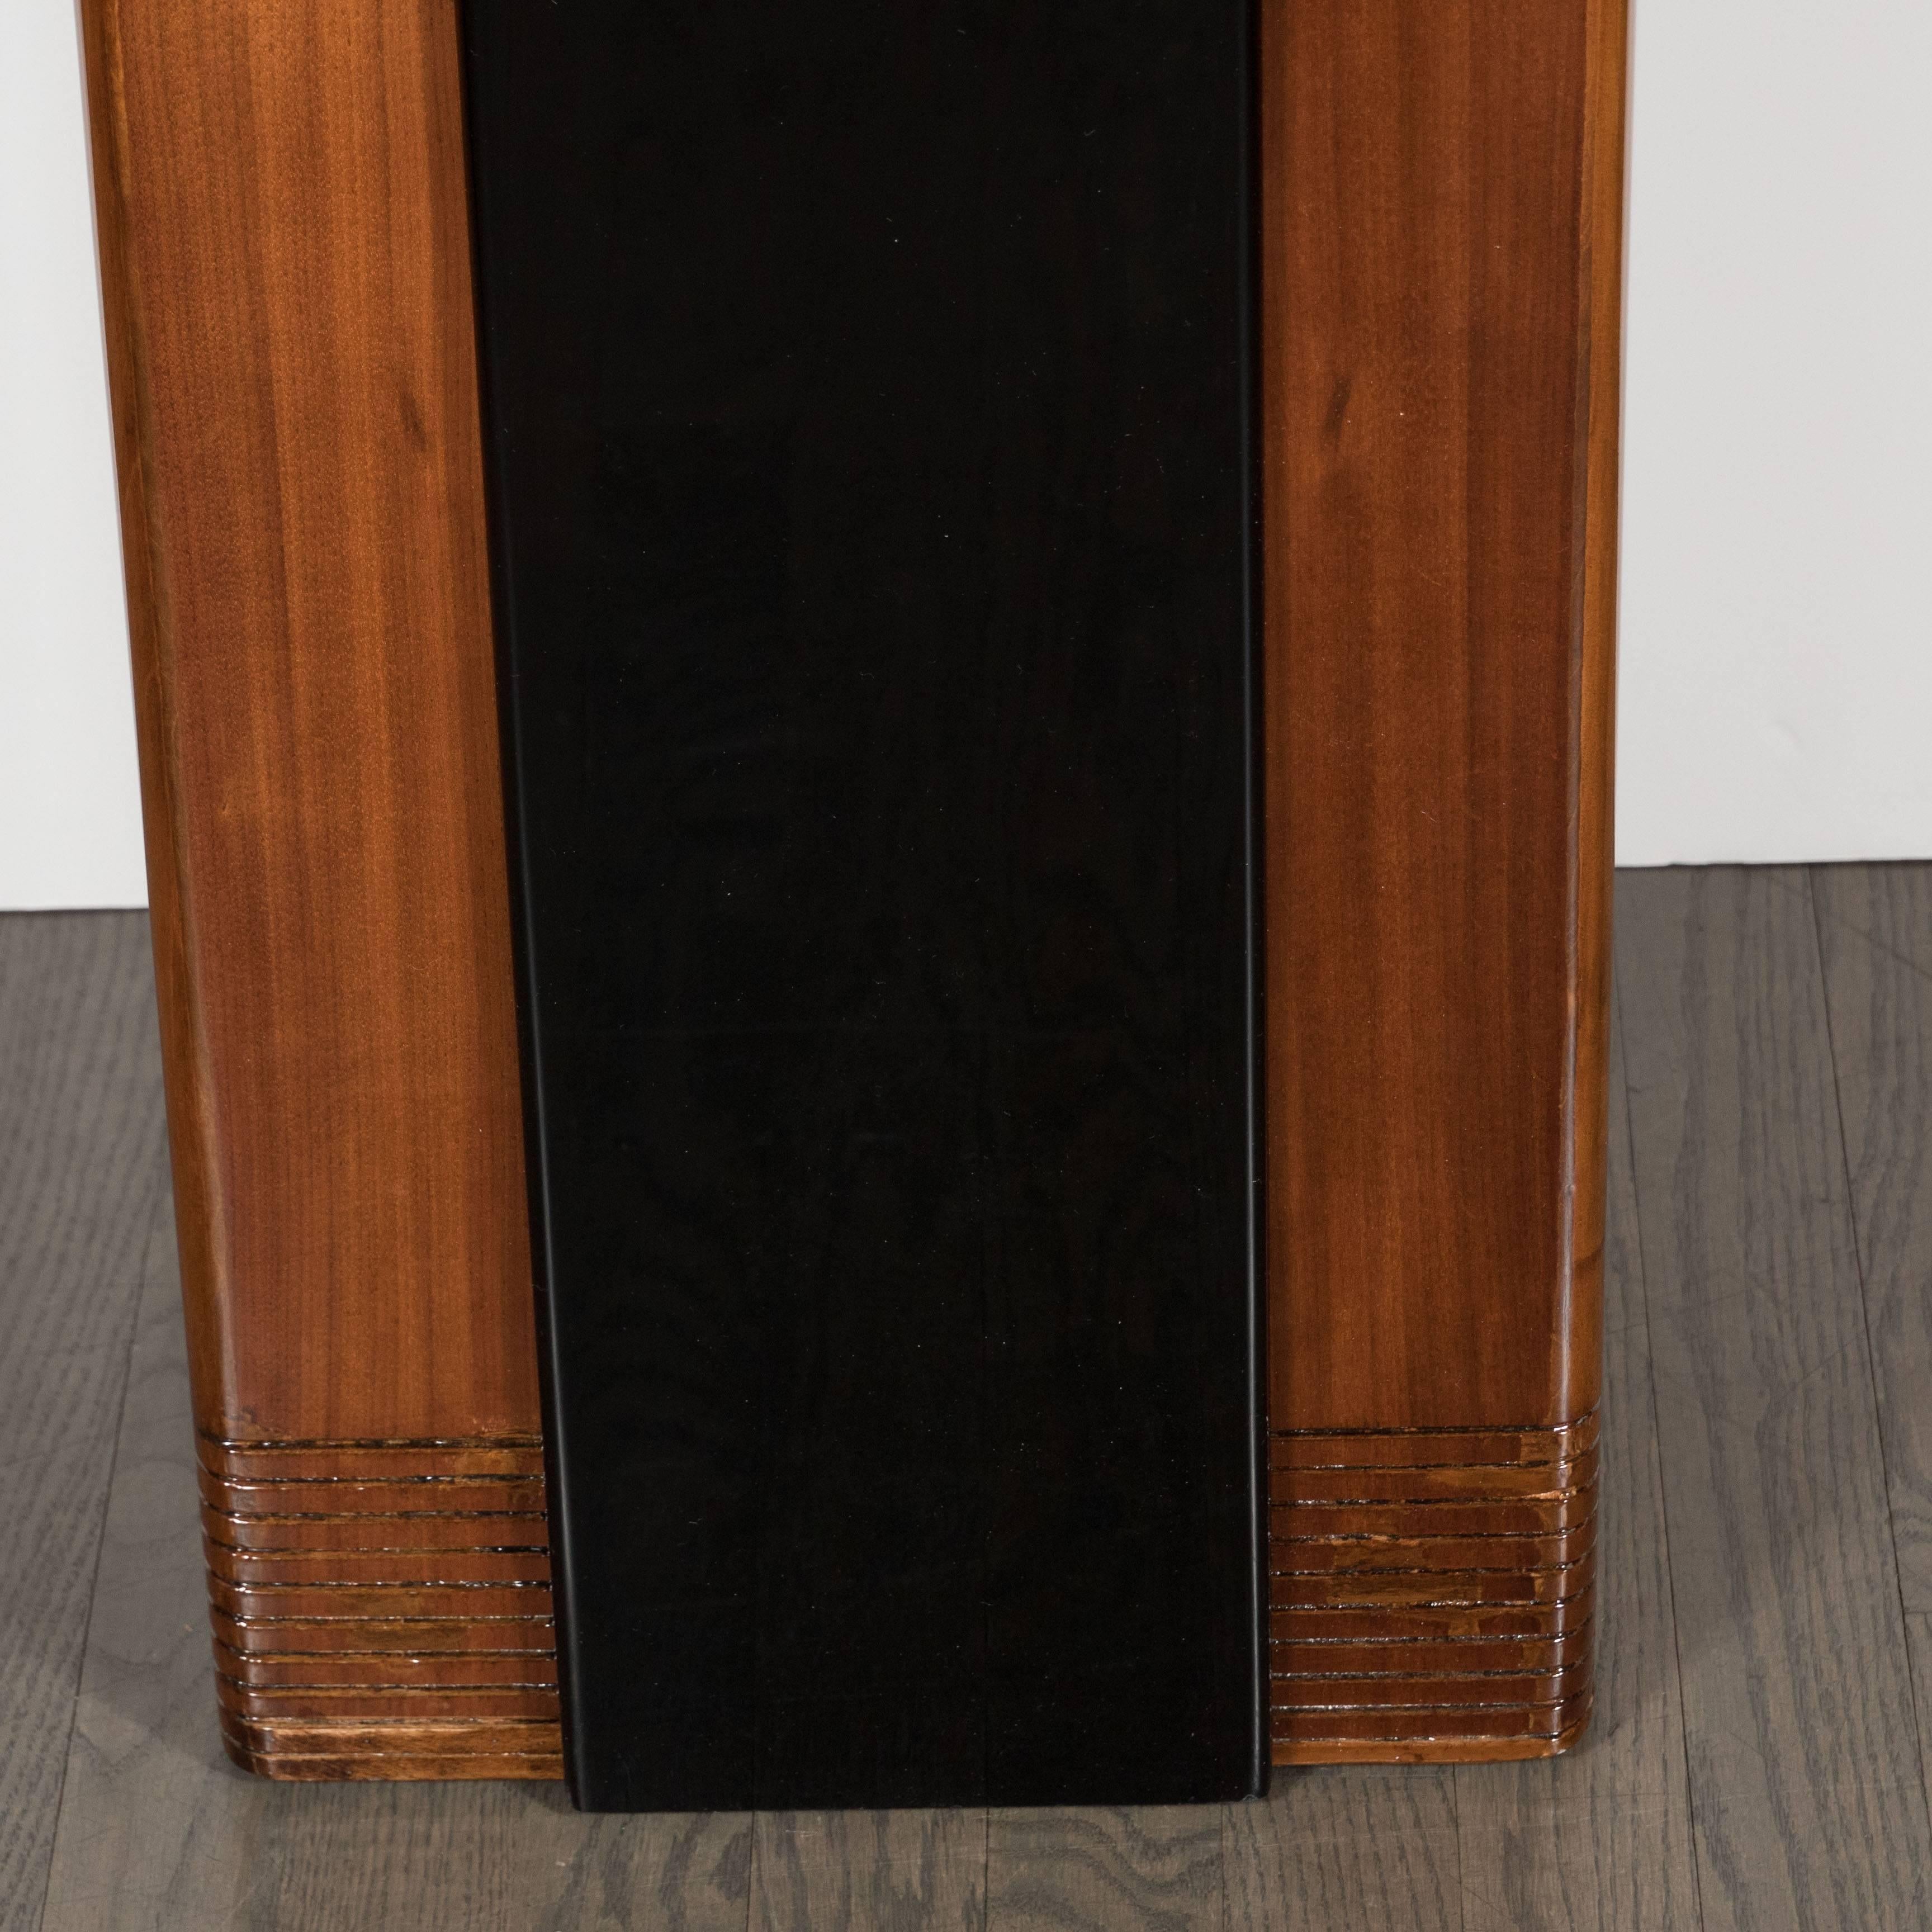 American Art Deco Skyscraper Grandfather Clock Walnut and Black Lacquer by Raymond Loewy